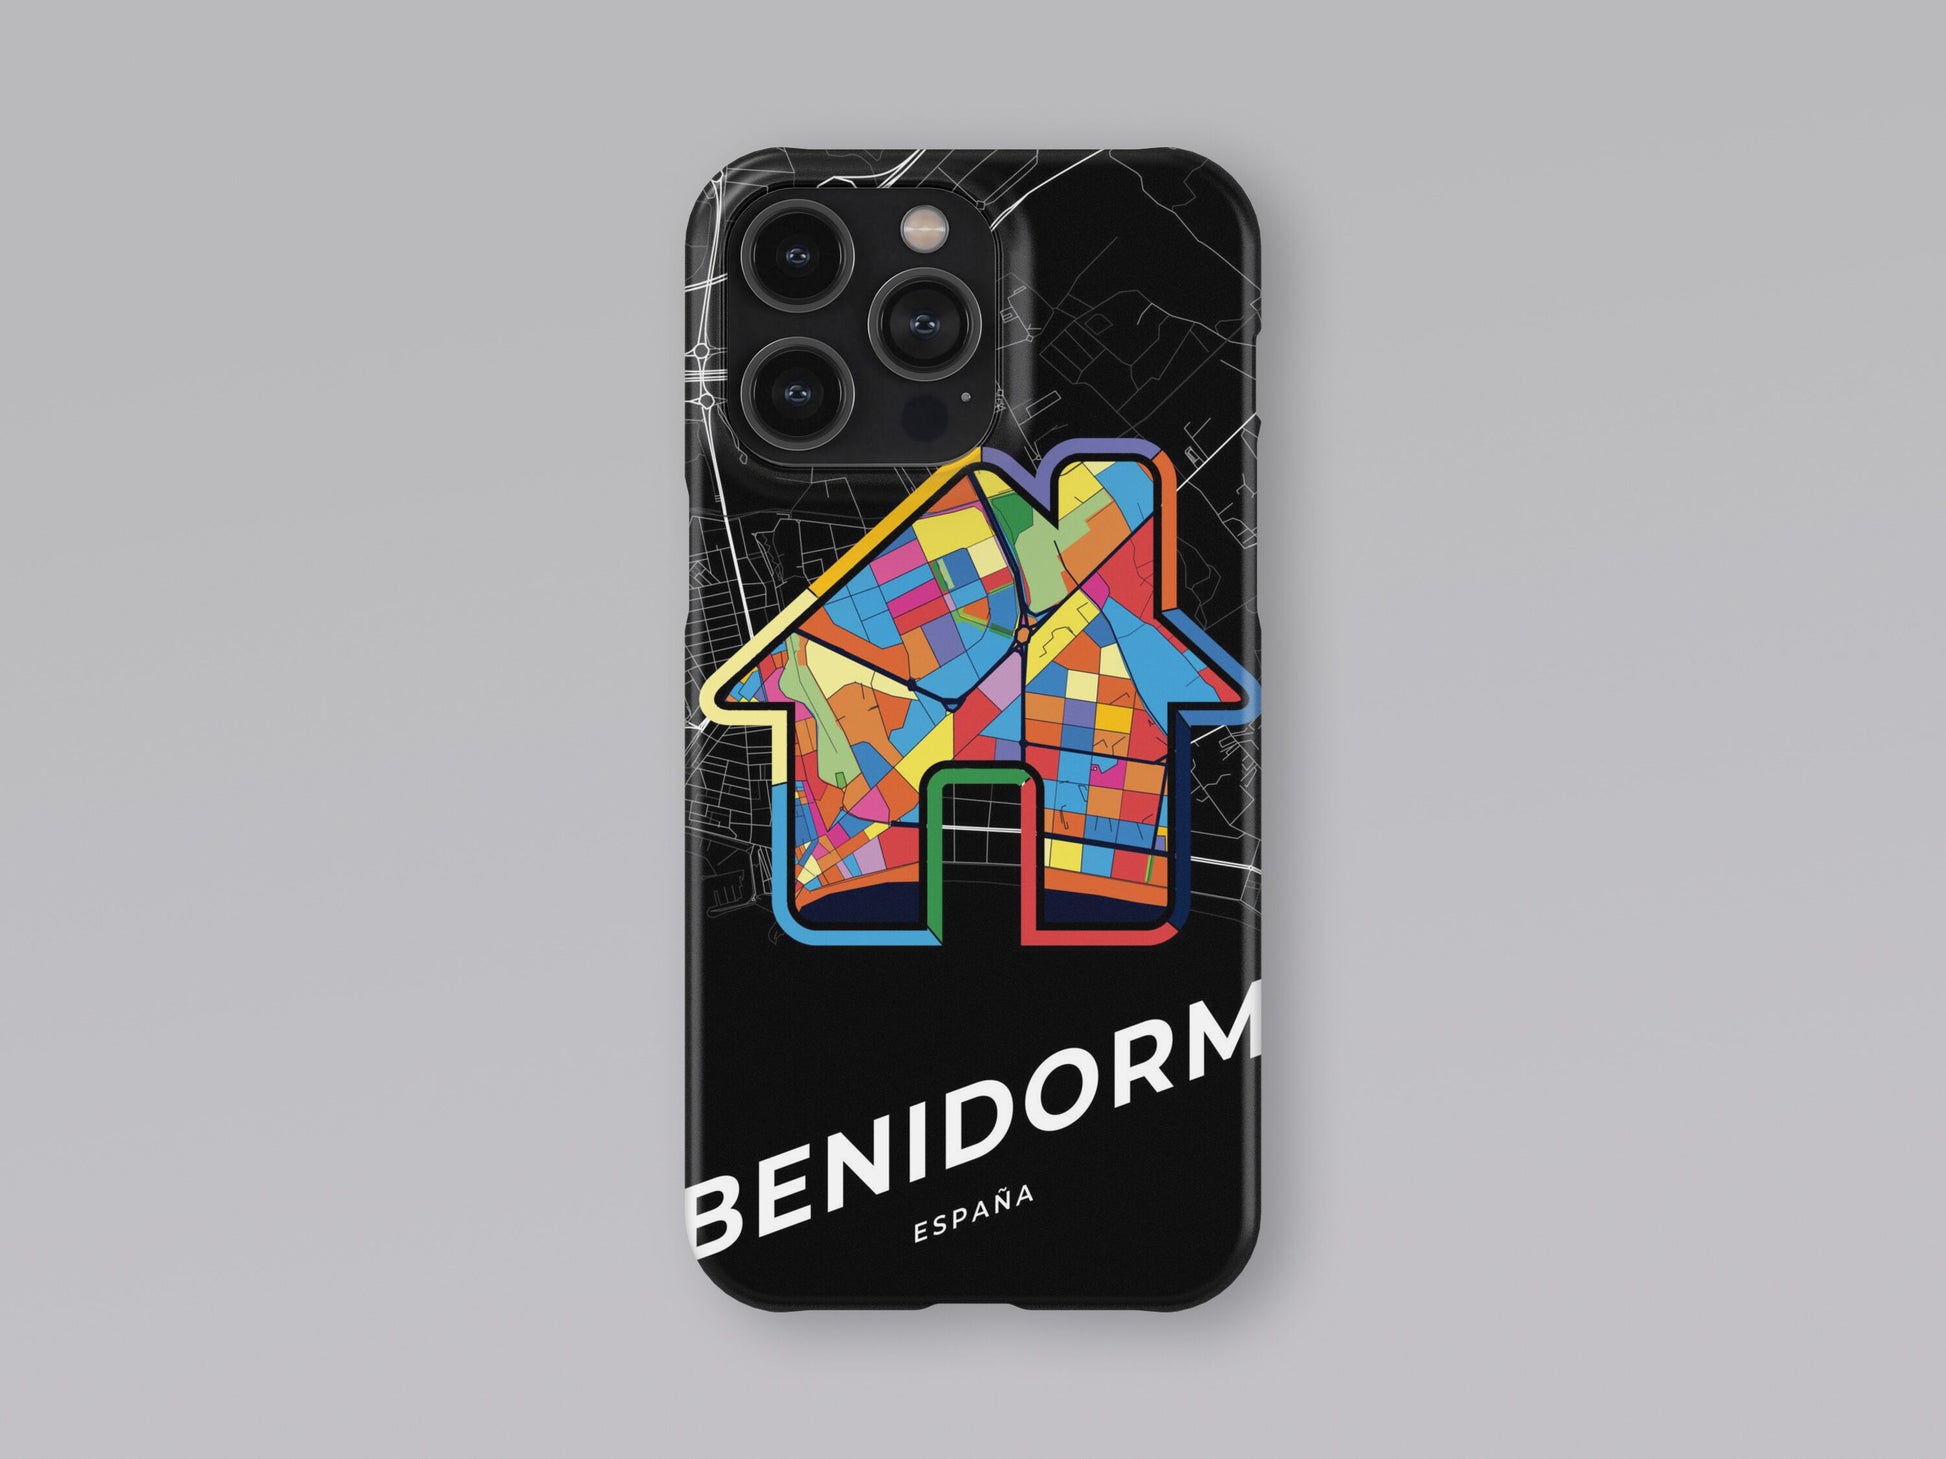 Benidorm Spain slim phone case with colorful icon. Birthday, wedding or housewarming gift. Couple match cases. 3